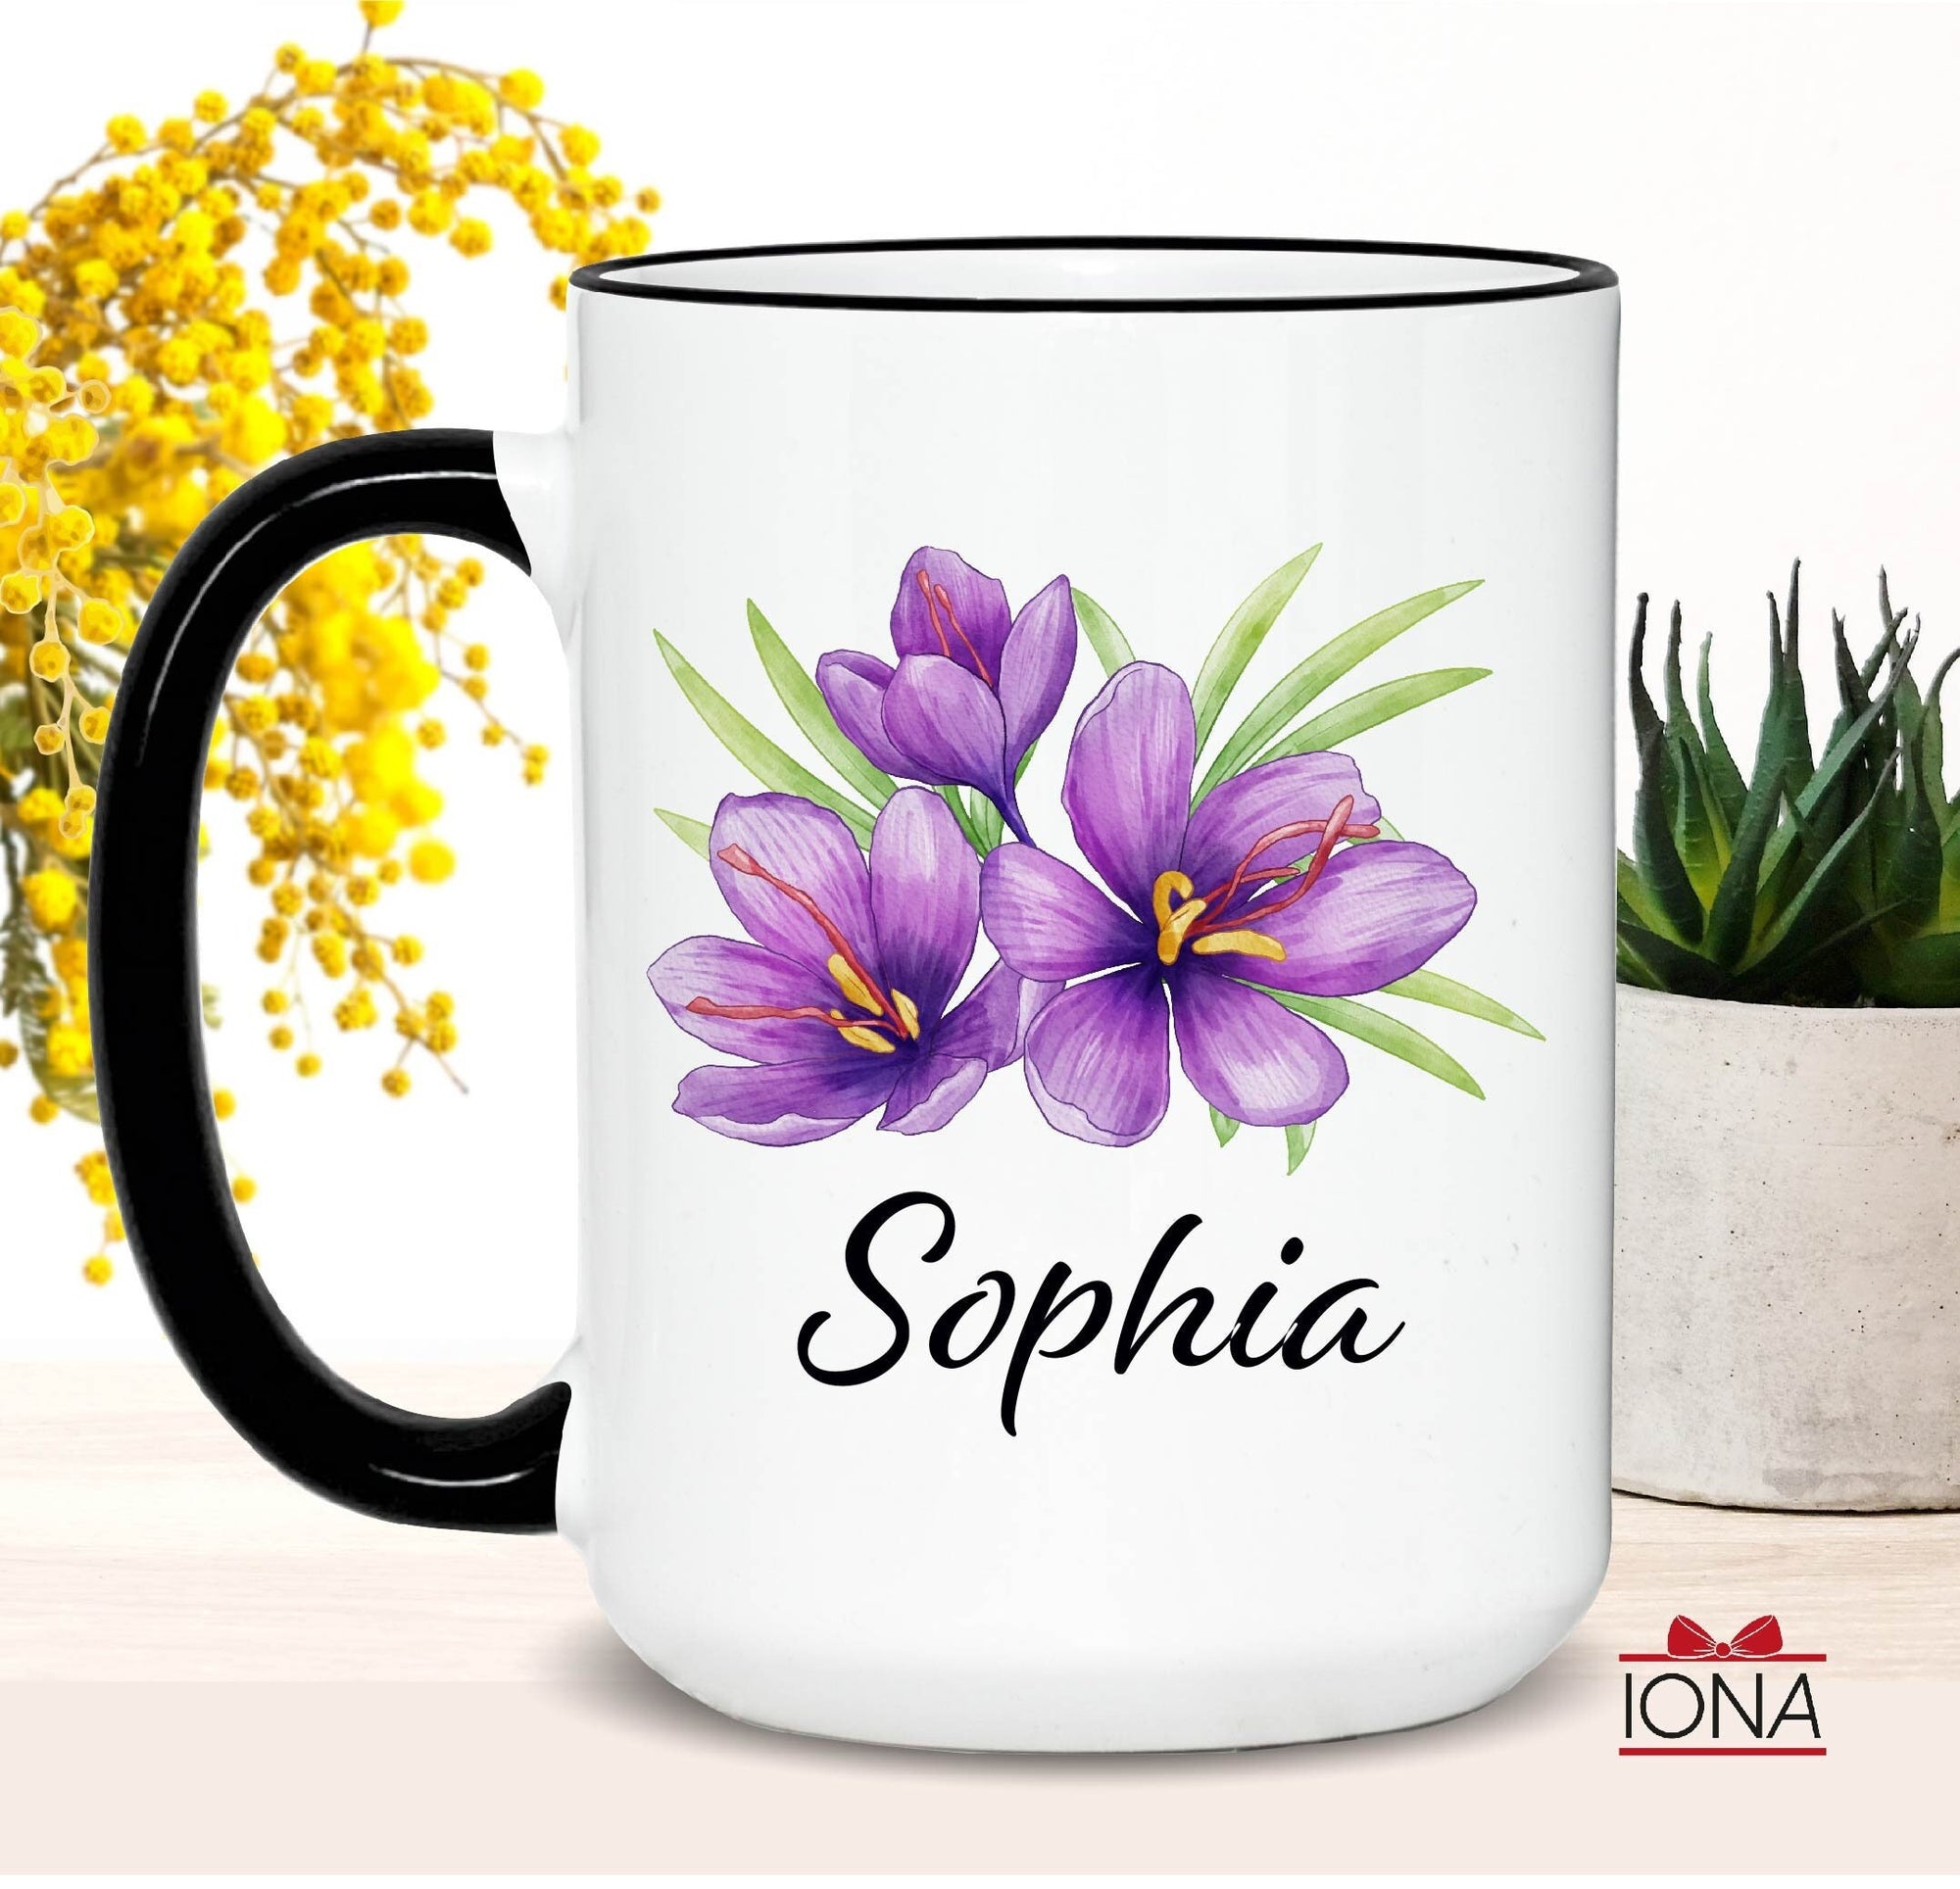 Crocus Name Mug, Gift for Women, Custom Name Coffee Mug, Name Cup Purple Floral Design, Personalized Gift for Her, Saffron Iris Flowers Gift